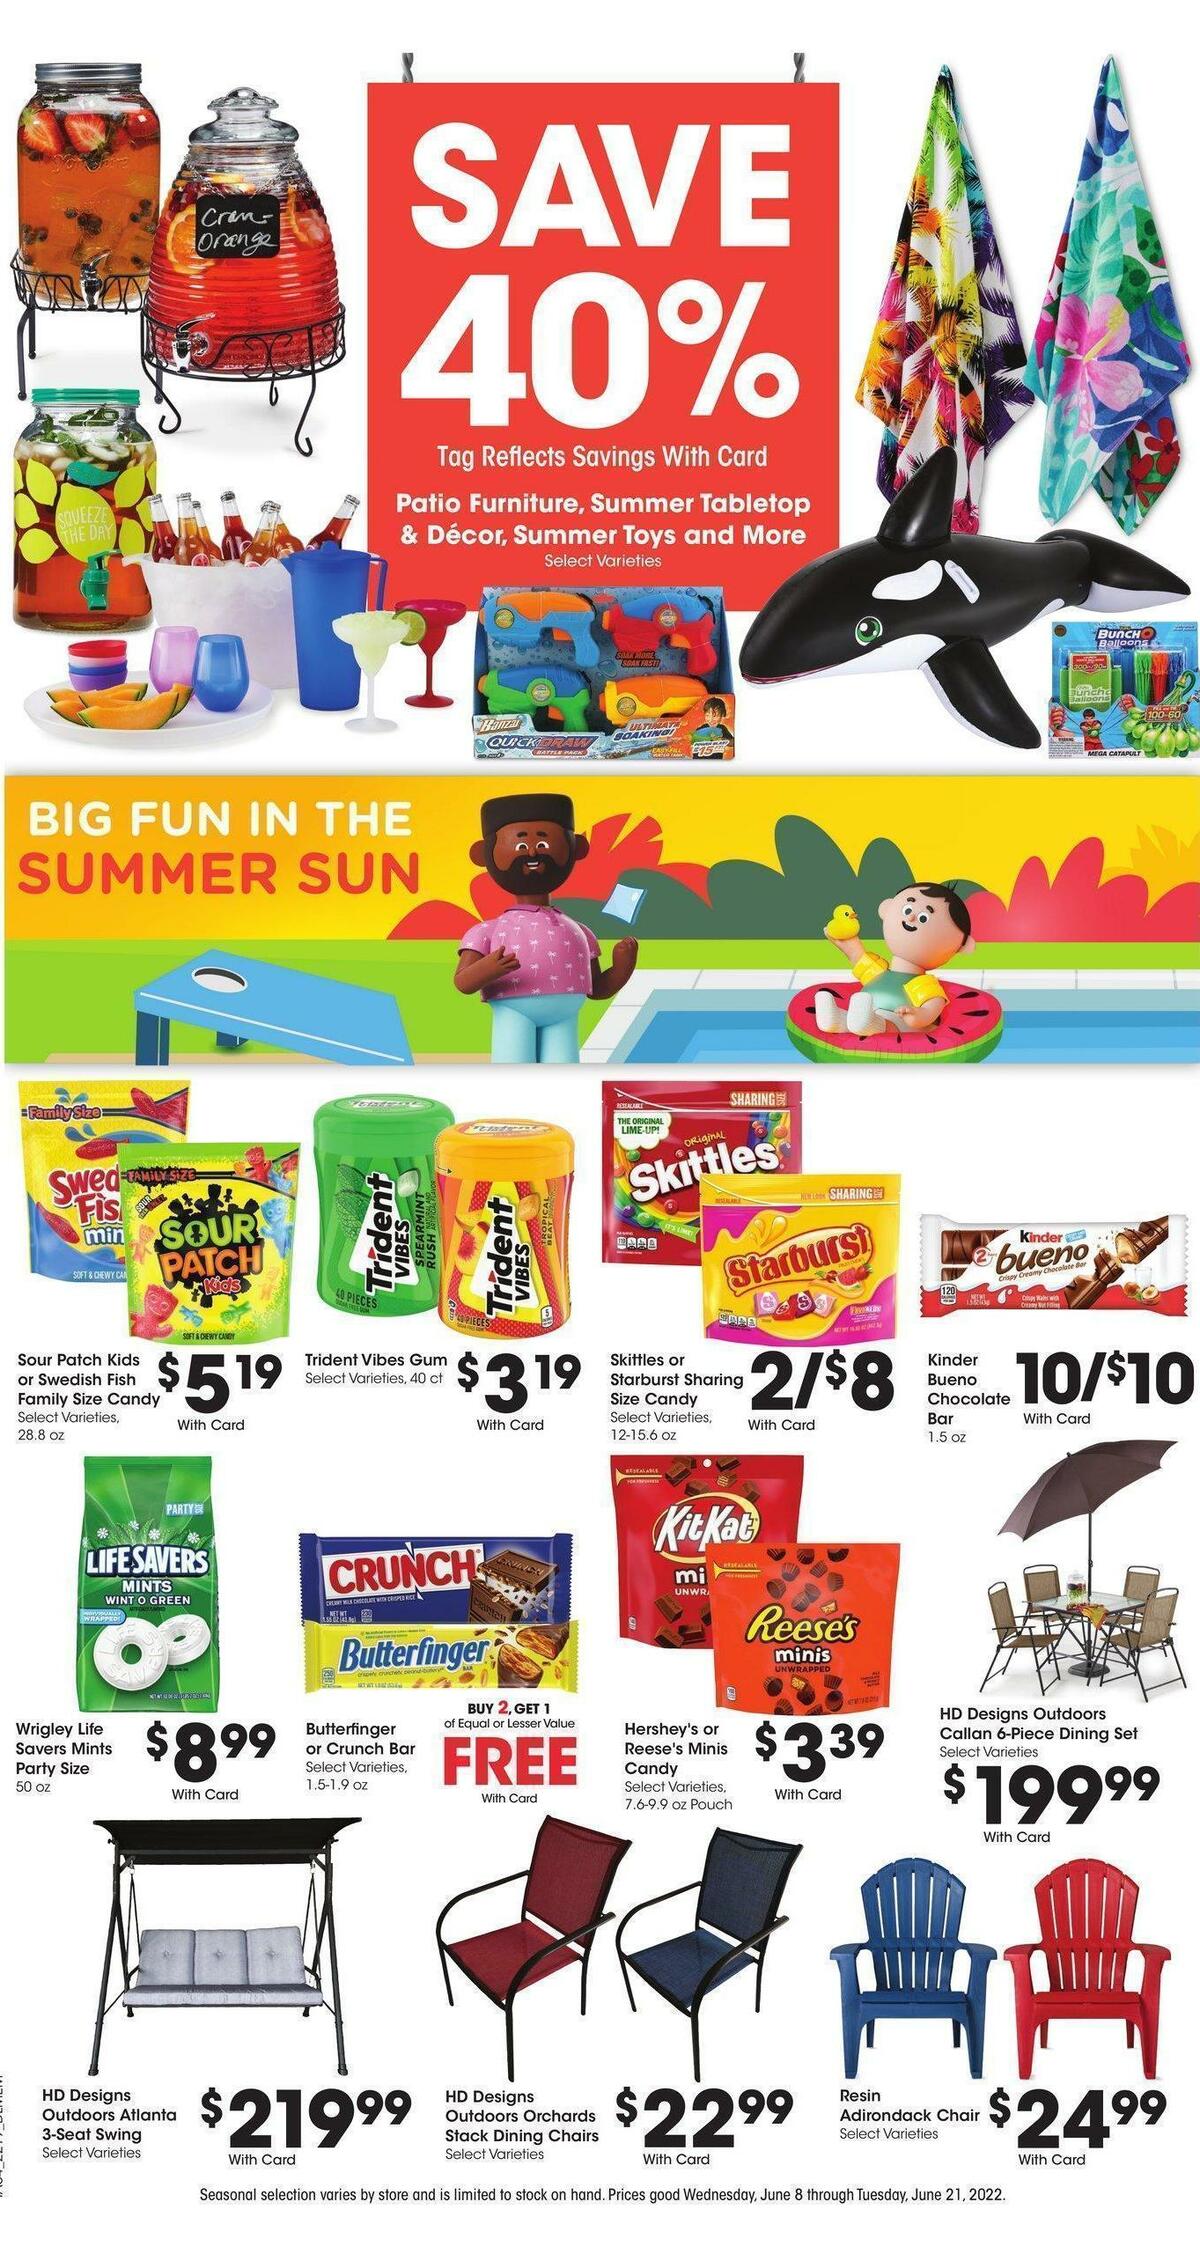 Kroger Weekly Ad from June 8